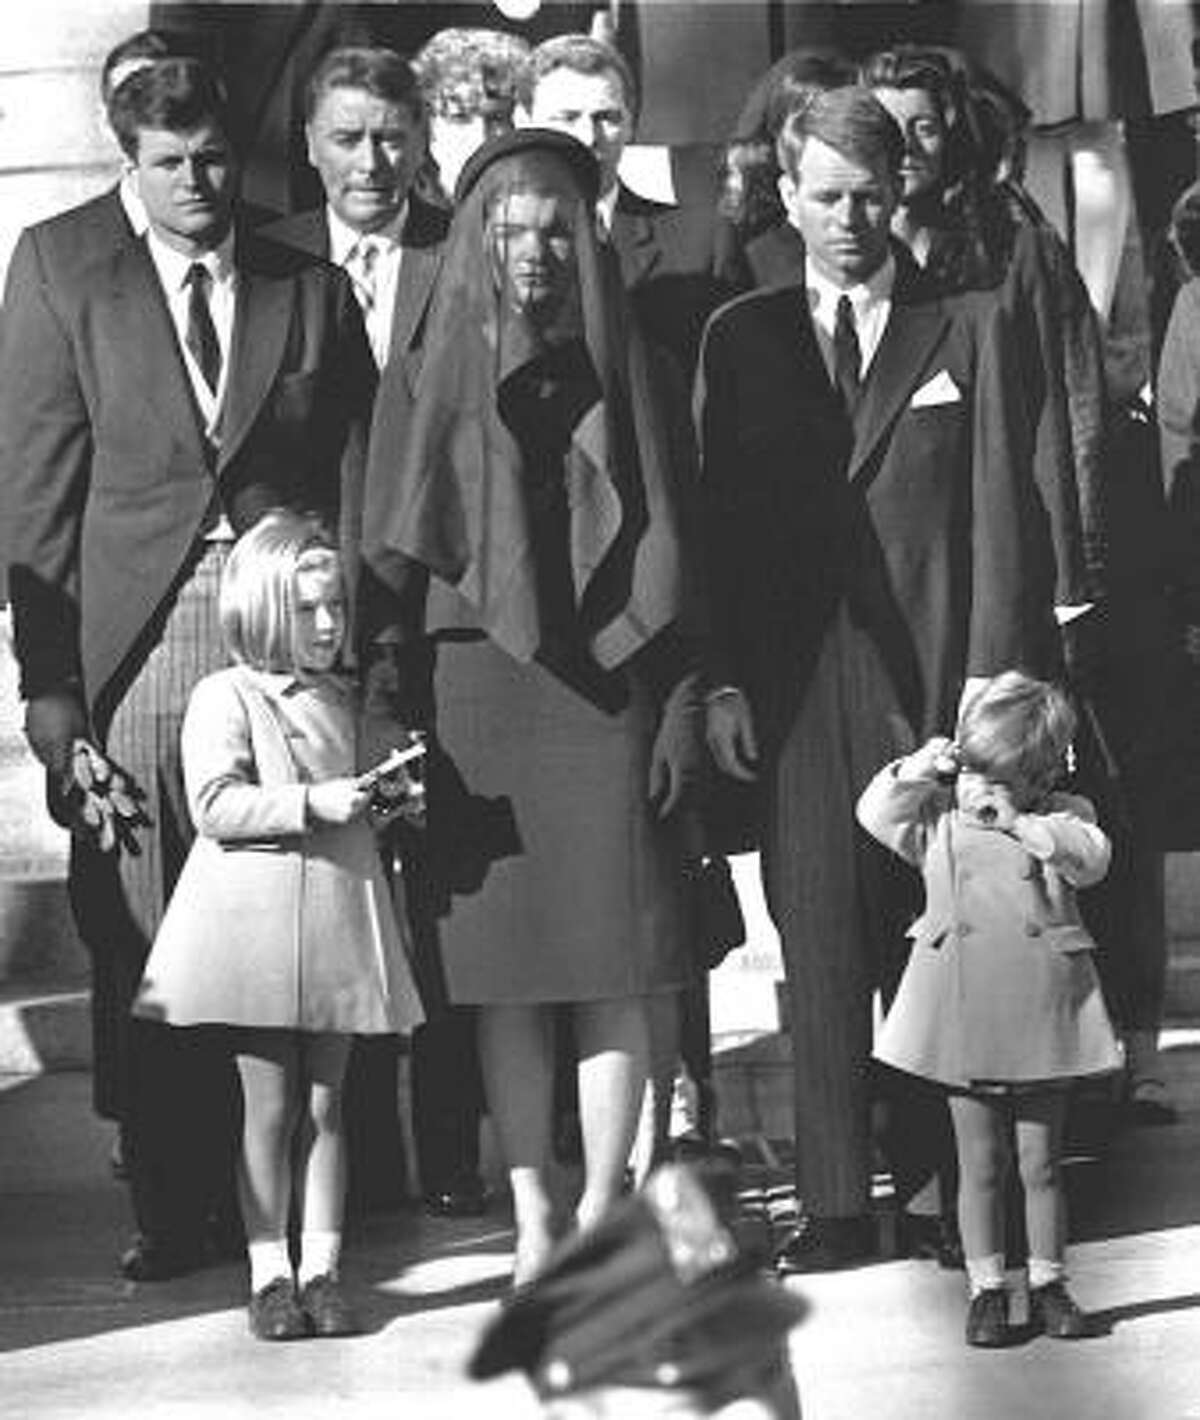 This November 26, 1963 file photo shows Jaqueline Kennedy, her children Caroline Kennedy and John F. Kennedy Jr, brothers-in law Ted Kennedy, left rear, and Robert Kennedy, right, during the funeral for her husband U.S. President John F. Kennedy in Washington, DC.